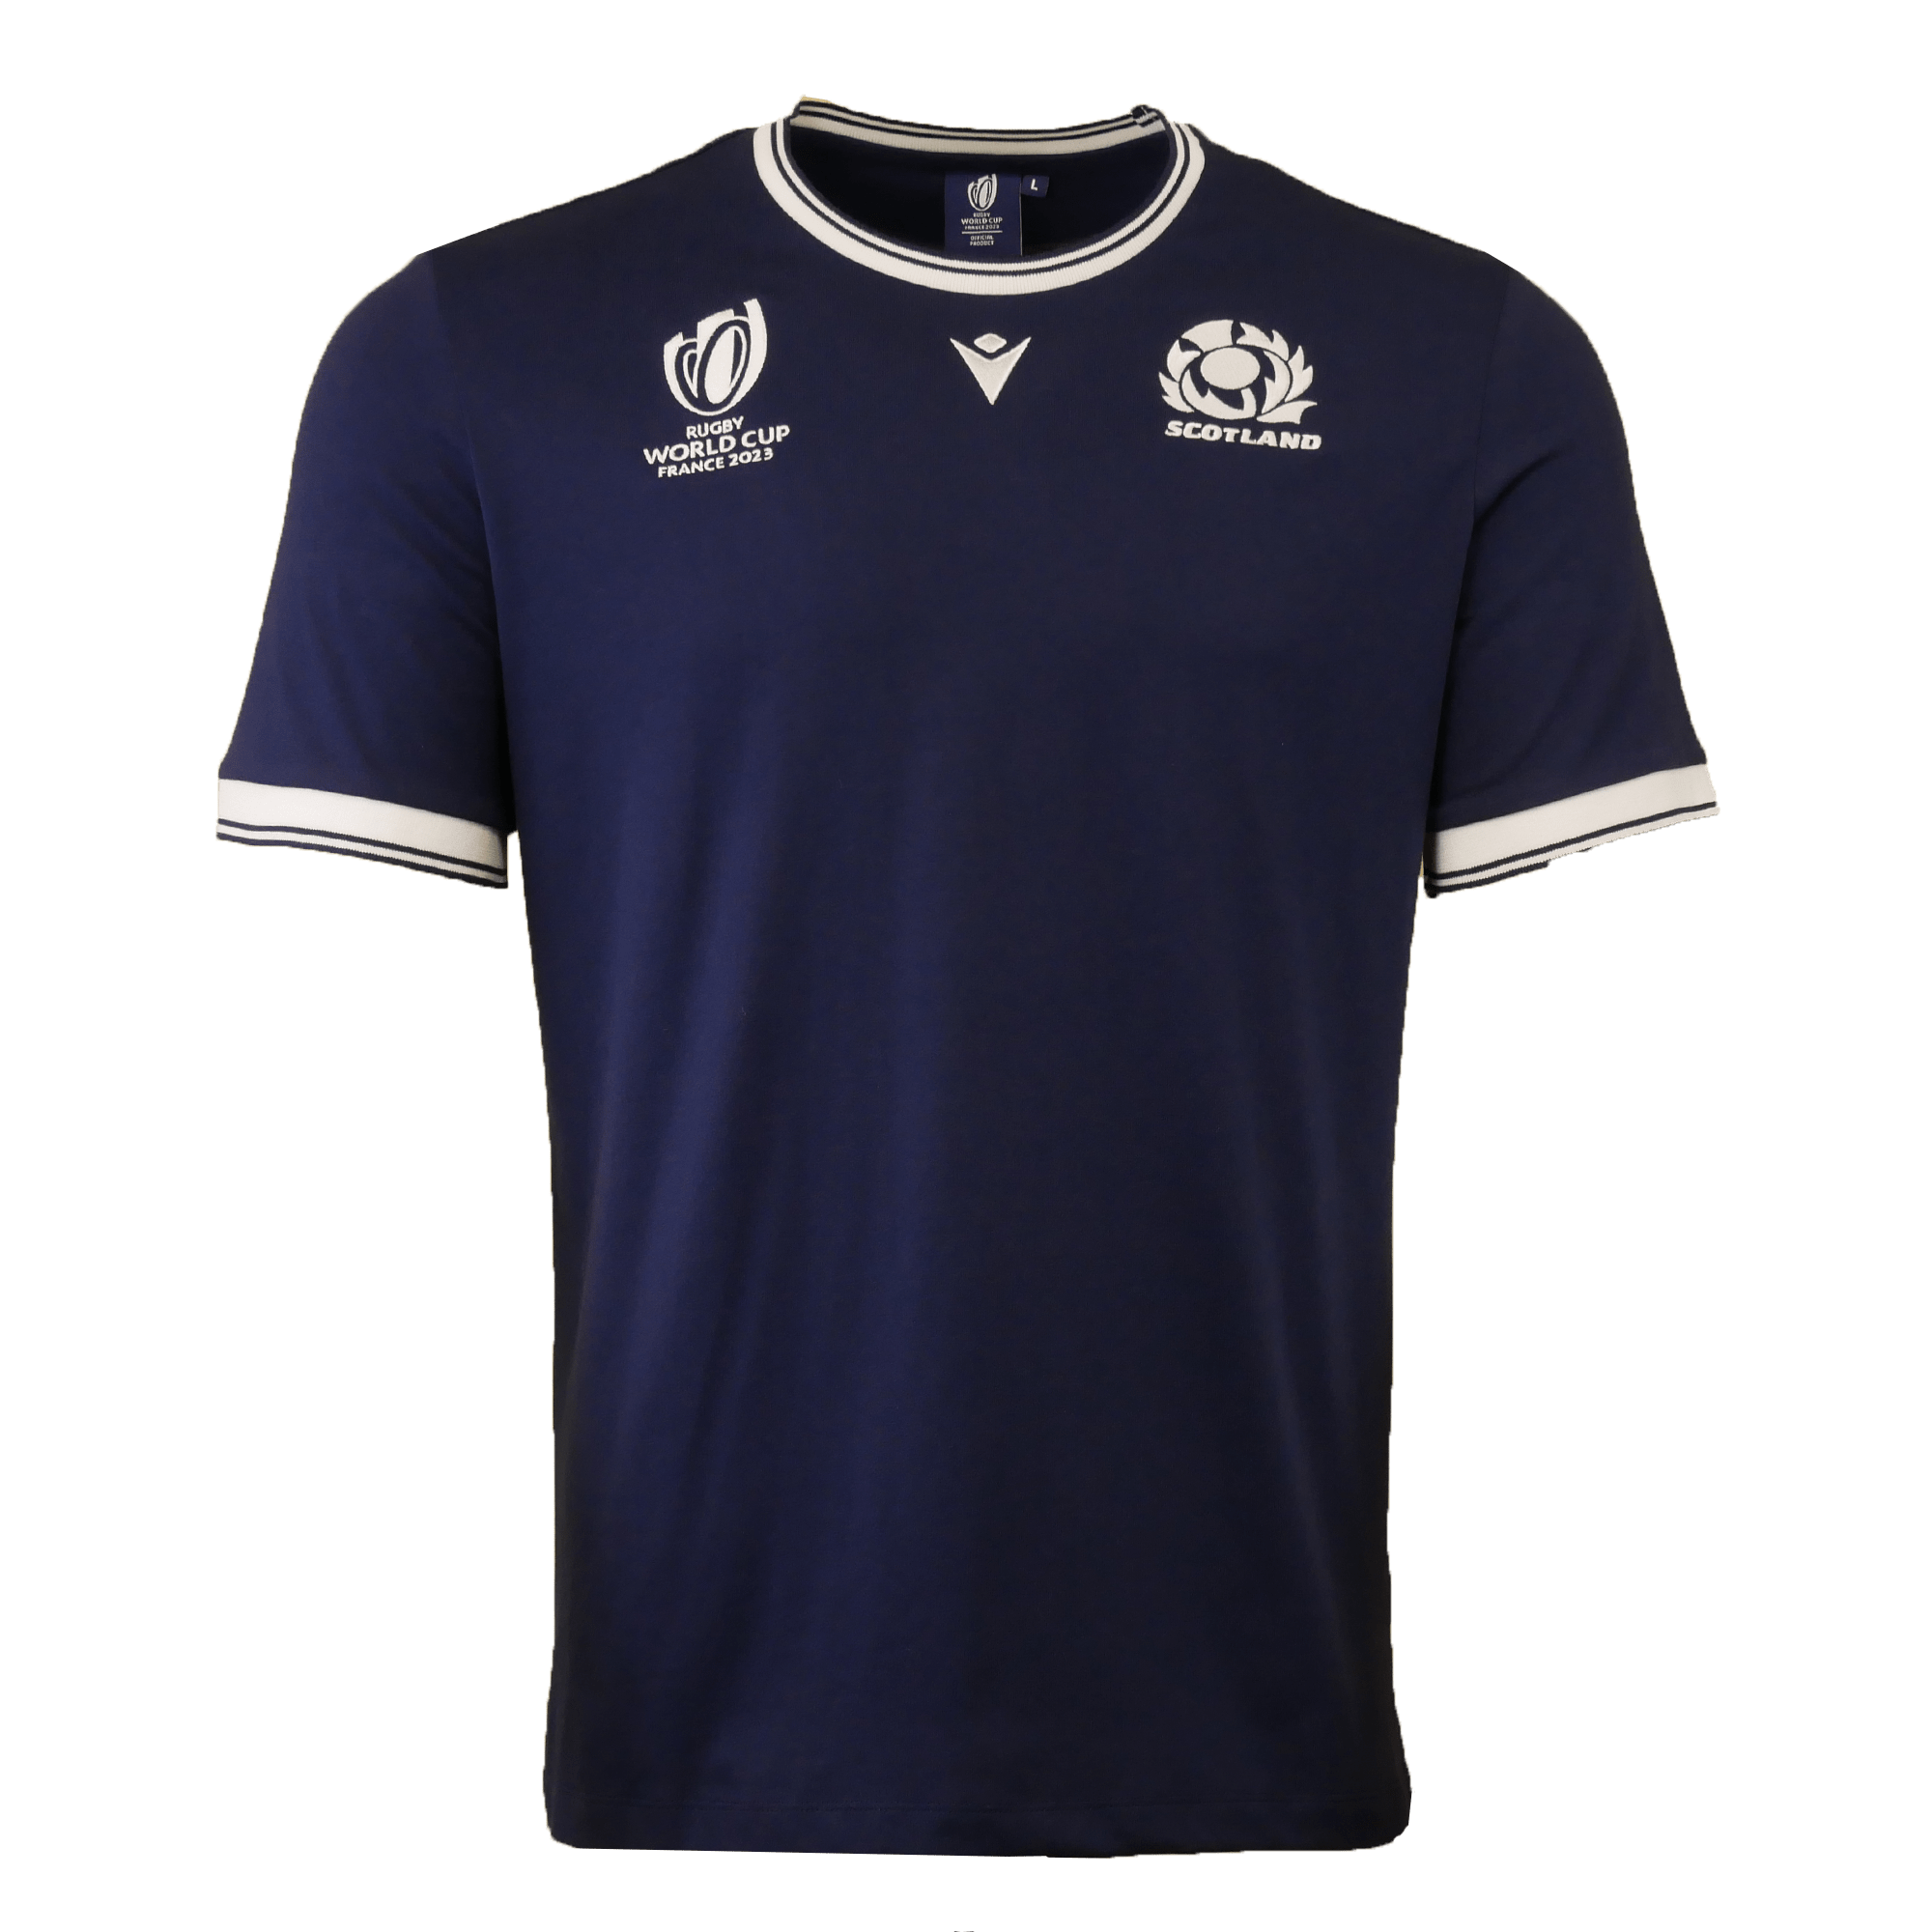 Scotland Rugby World Cup 23 Logo T-shirt by Macron | World Rugby Shop